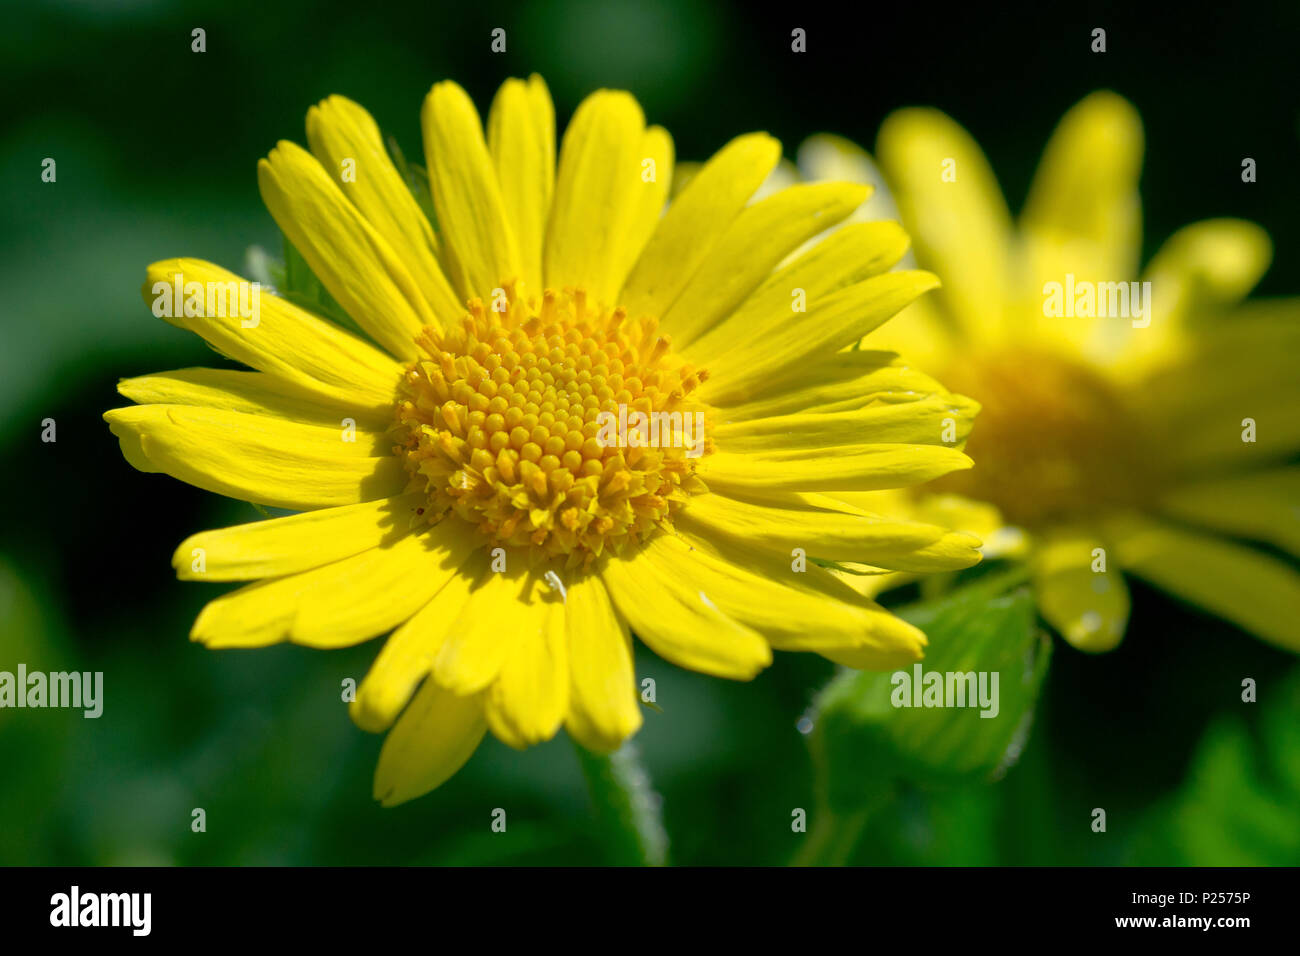 Leopard's-bane (doronicum pardalianches), close up on one flower out of two showing detail. Stock Photo